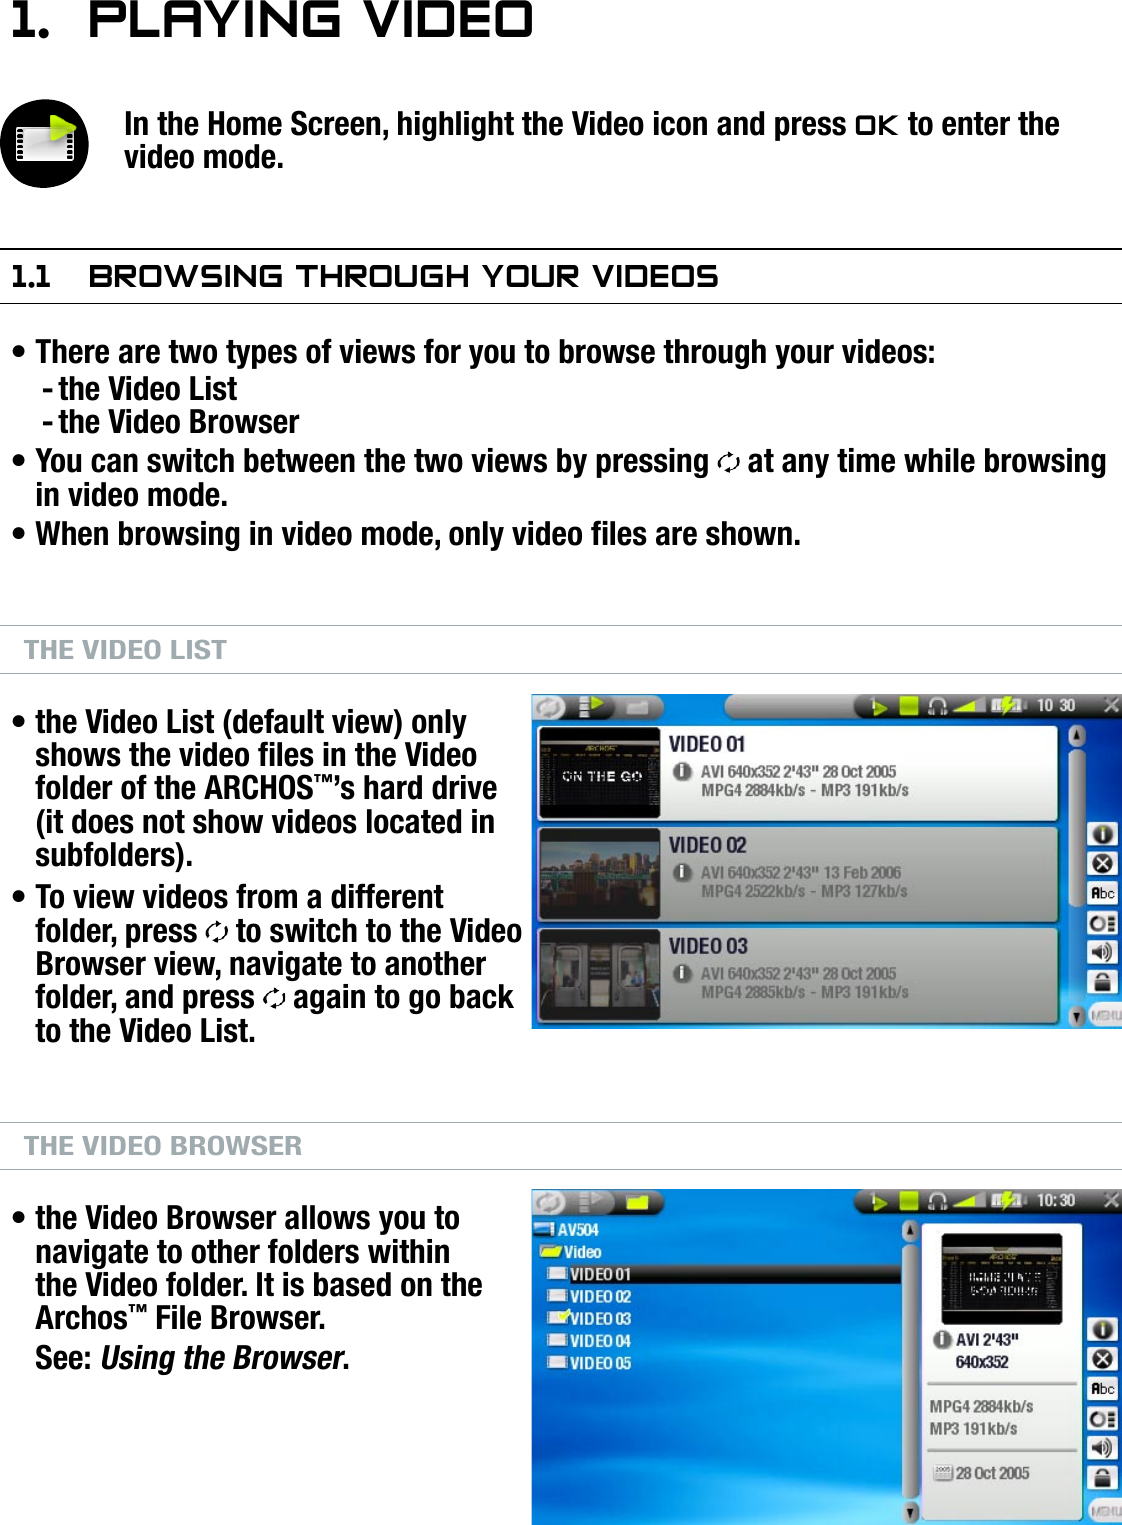 504/604MANUAL V2.0PLAYING VIDEO   &gt;   p. 81.  PlayIng VIdeOIn the Home Screen, highlight the Video icon and press OK to enter the video mode.1.1  brOwsIng ThrOugh yOur VIdeOsThere are two types of views for you to browse through your videos:the Video Listthe Video BrowserYou can switch between the two views by pressing   at any time while browsing in video mode.When browsing in video mode, only video les are shown.THE VIDEO LISTthe Video List (default view) only shows the video les in the Video folder of the ARCHOS™’s hard drive (it does not show videos located in subfolders).To view videos from a different folder, press   to switch to the Video Browser view, navigate to another folder, and press   again to go back to the Video List.THE VIDEO BROWSERthe Video Browser allows you to navigate to other folders within the Video folder. It is based on the Archos™ File Browser.See: Using the Browser.•--•••••